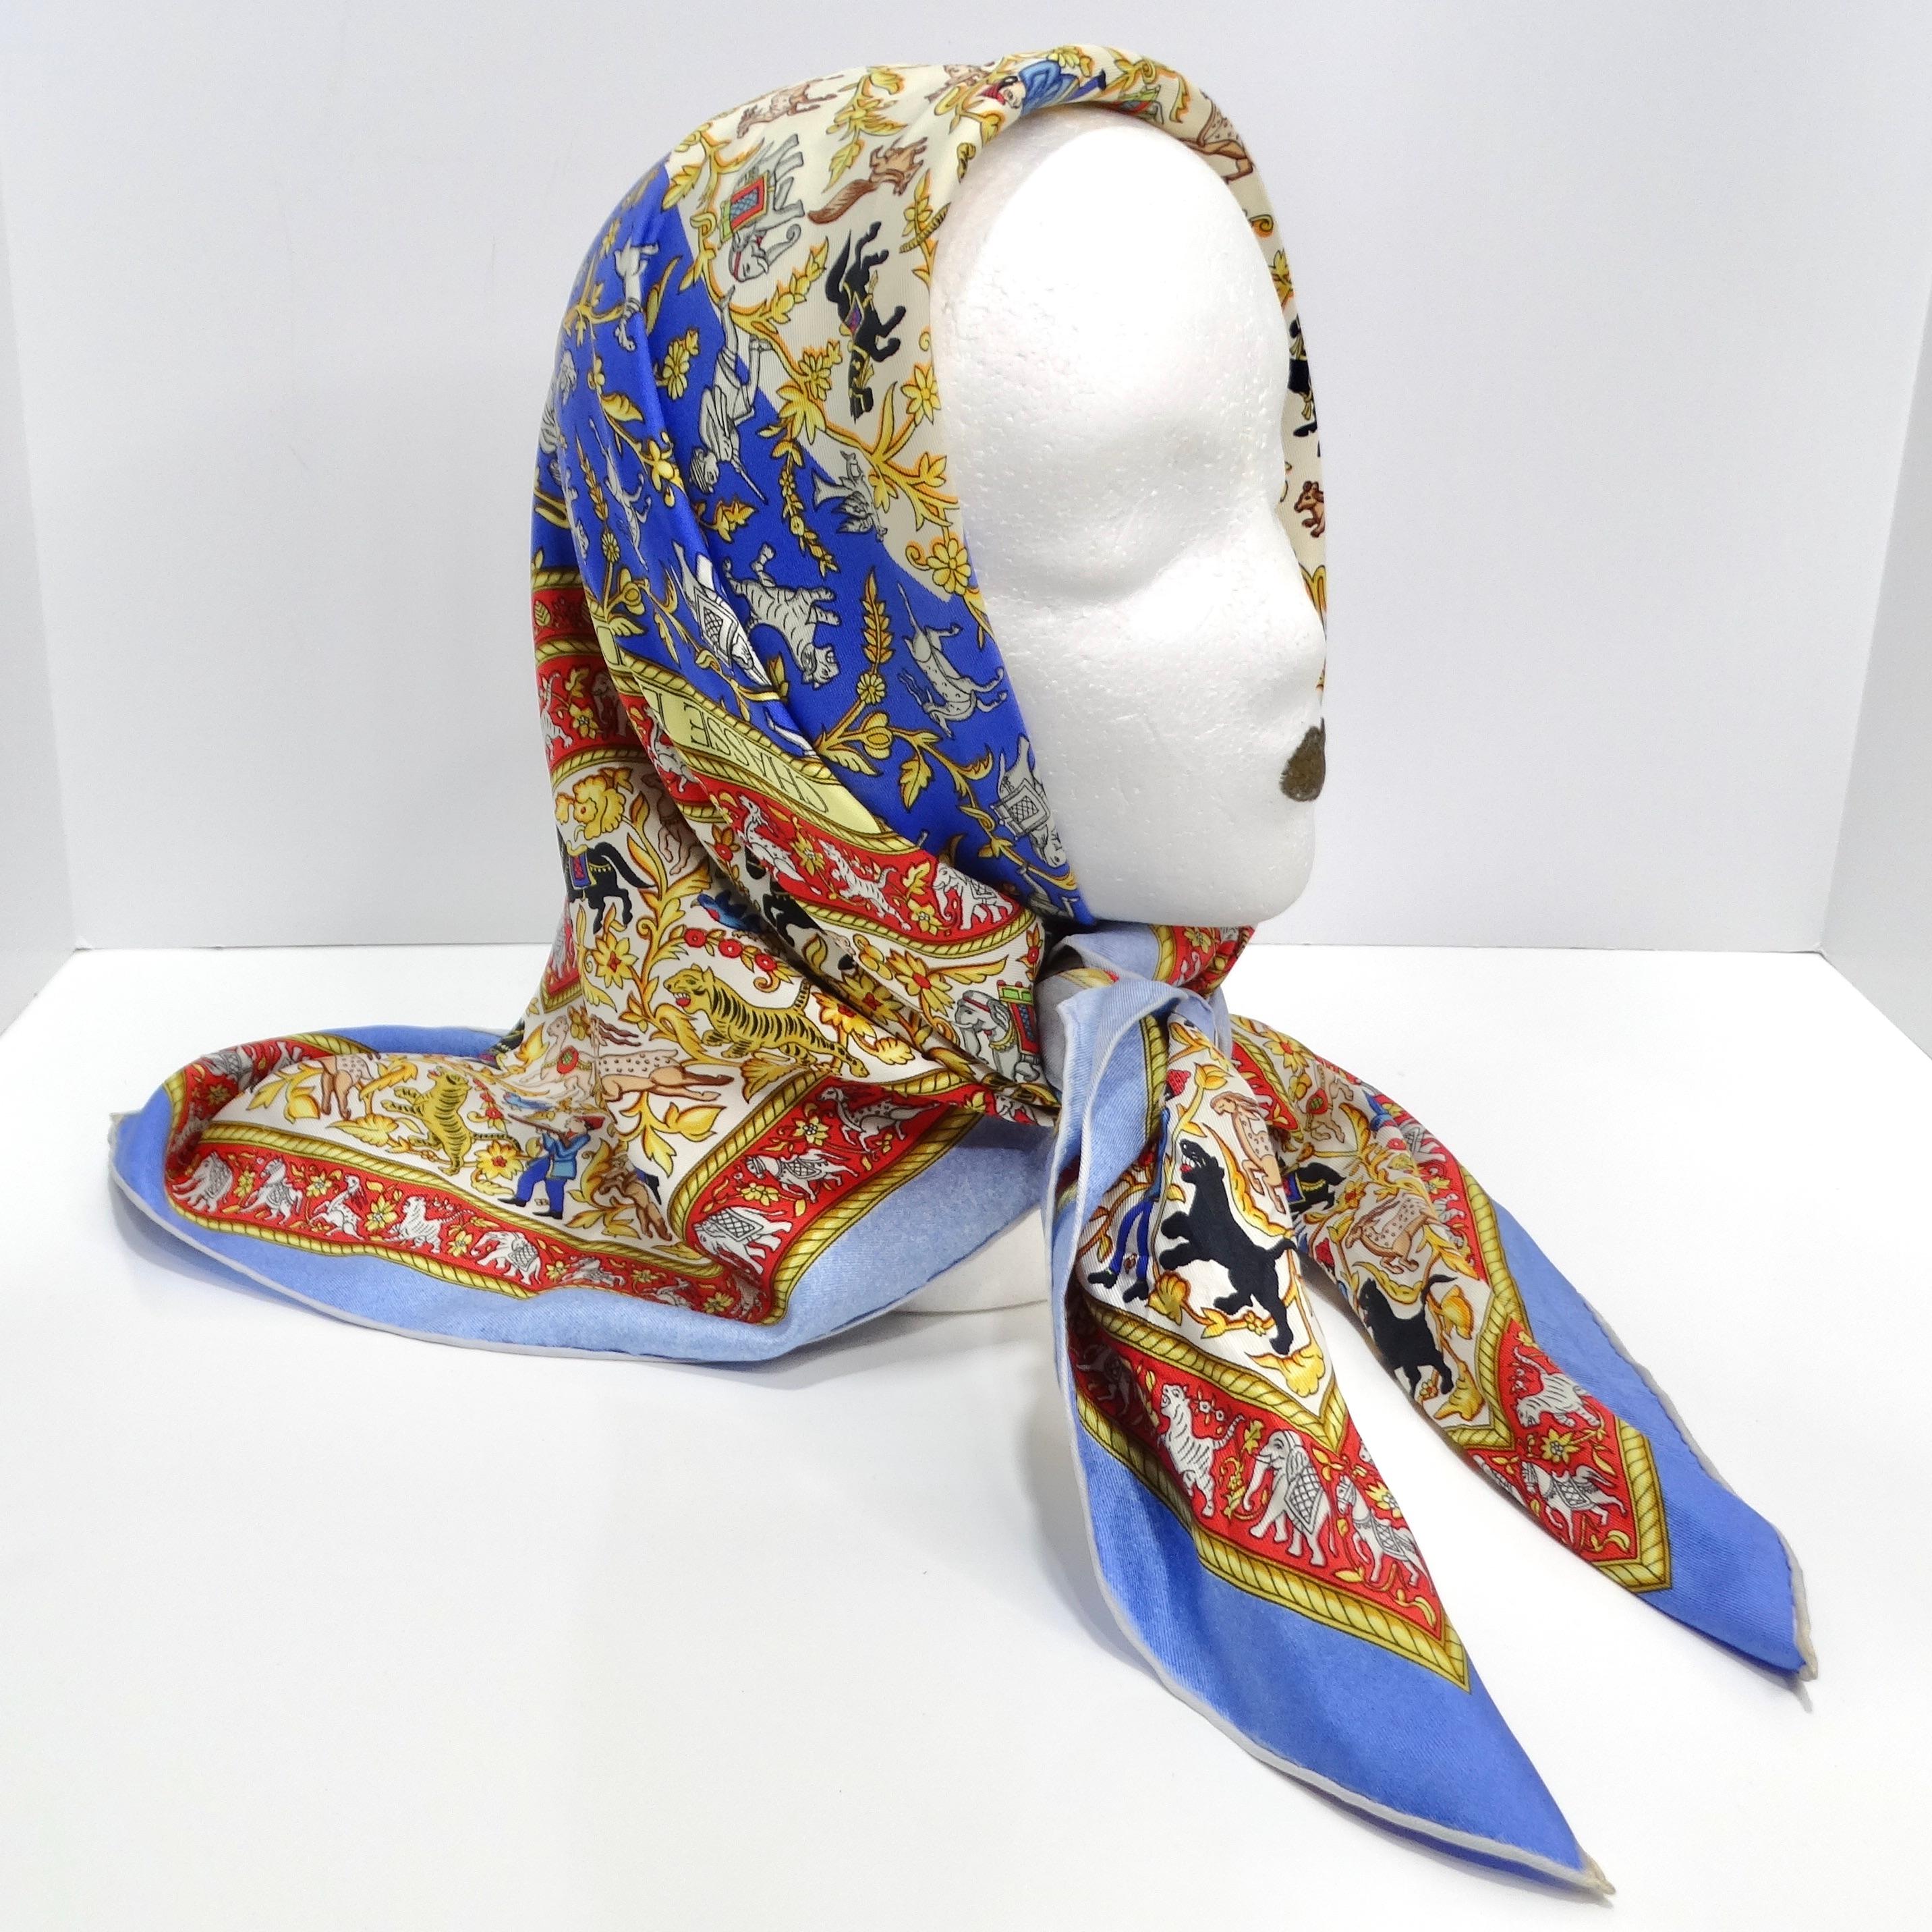 Introducing the Hermes Chasse En Inde Silk Printed Scarf, a classic and elegant accessory that captures the essence of luxury and sophistication. Crafted from luxurious silk, this iconic scarf features a stunning 'Chasse En Inde' print inspired by